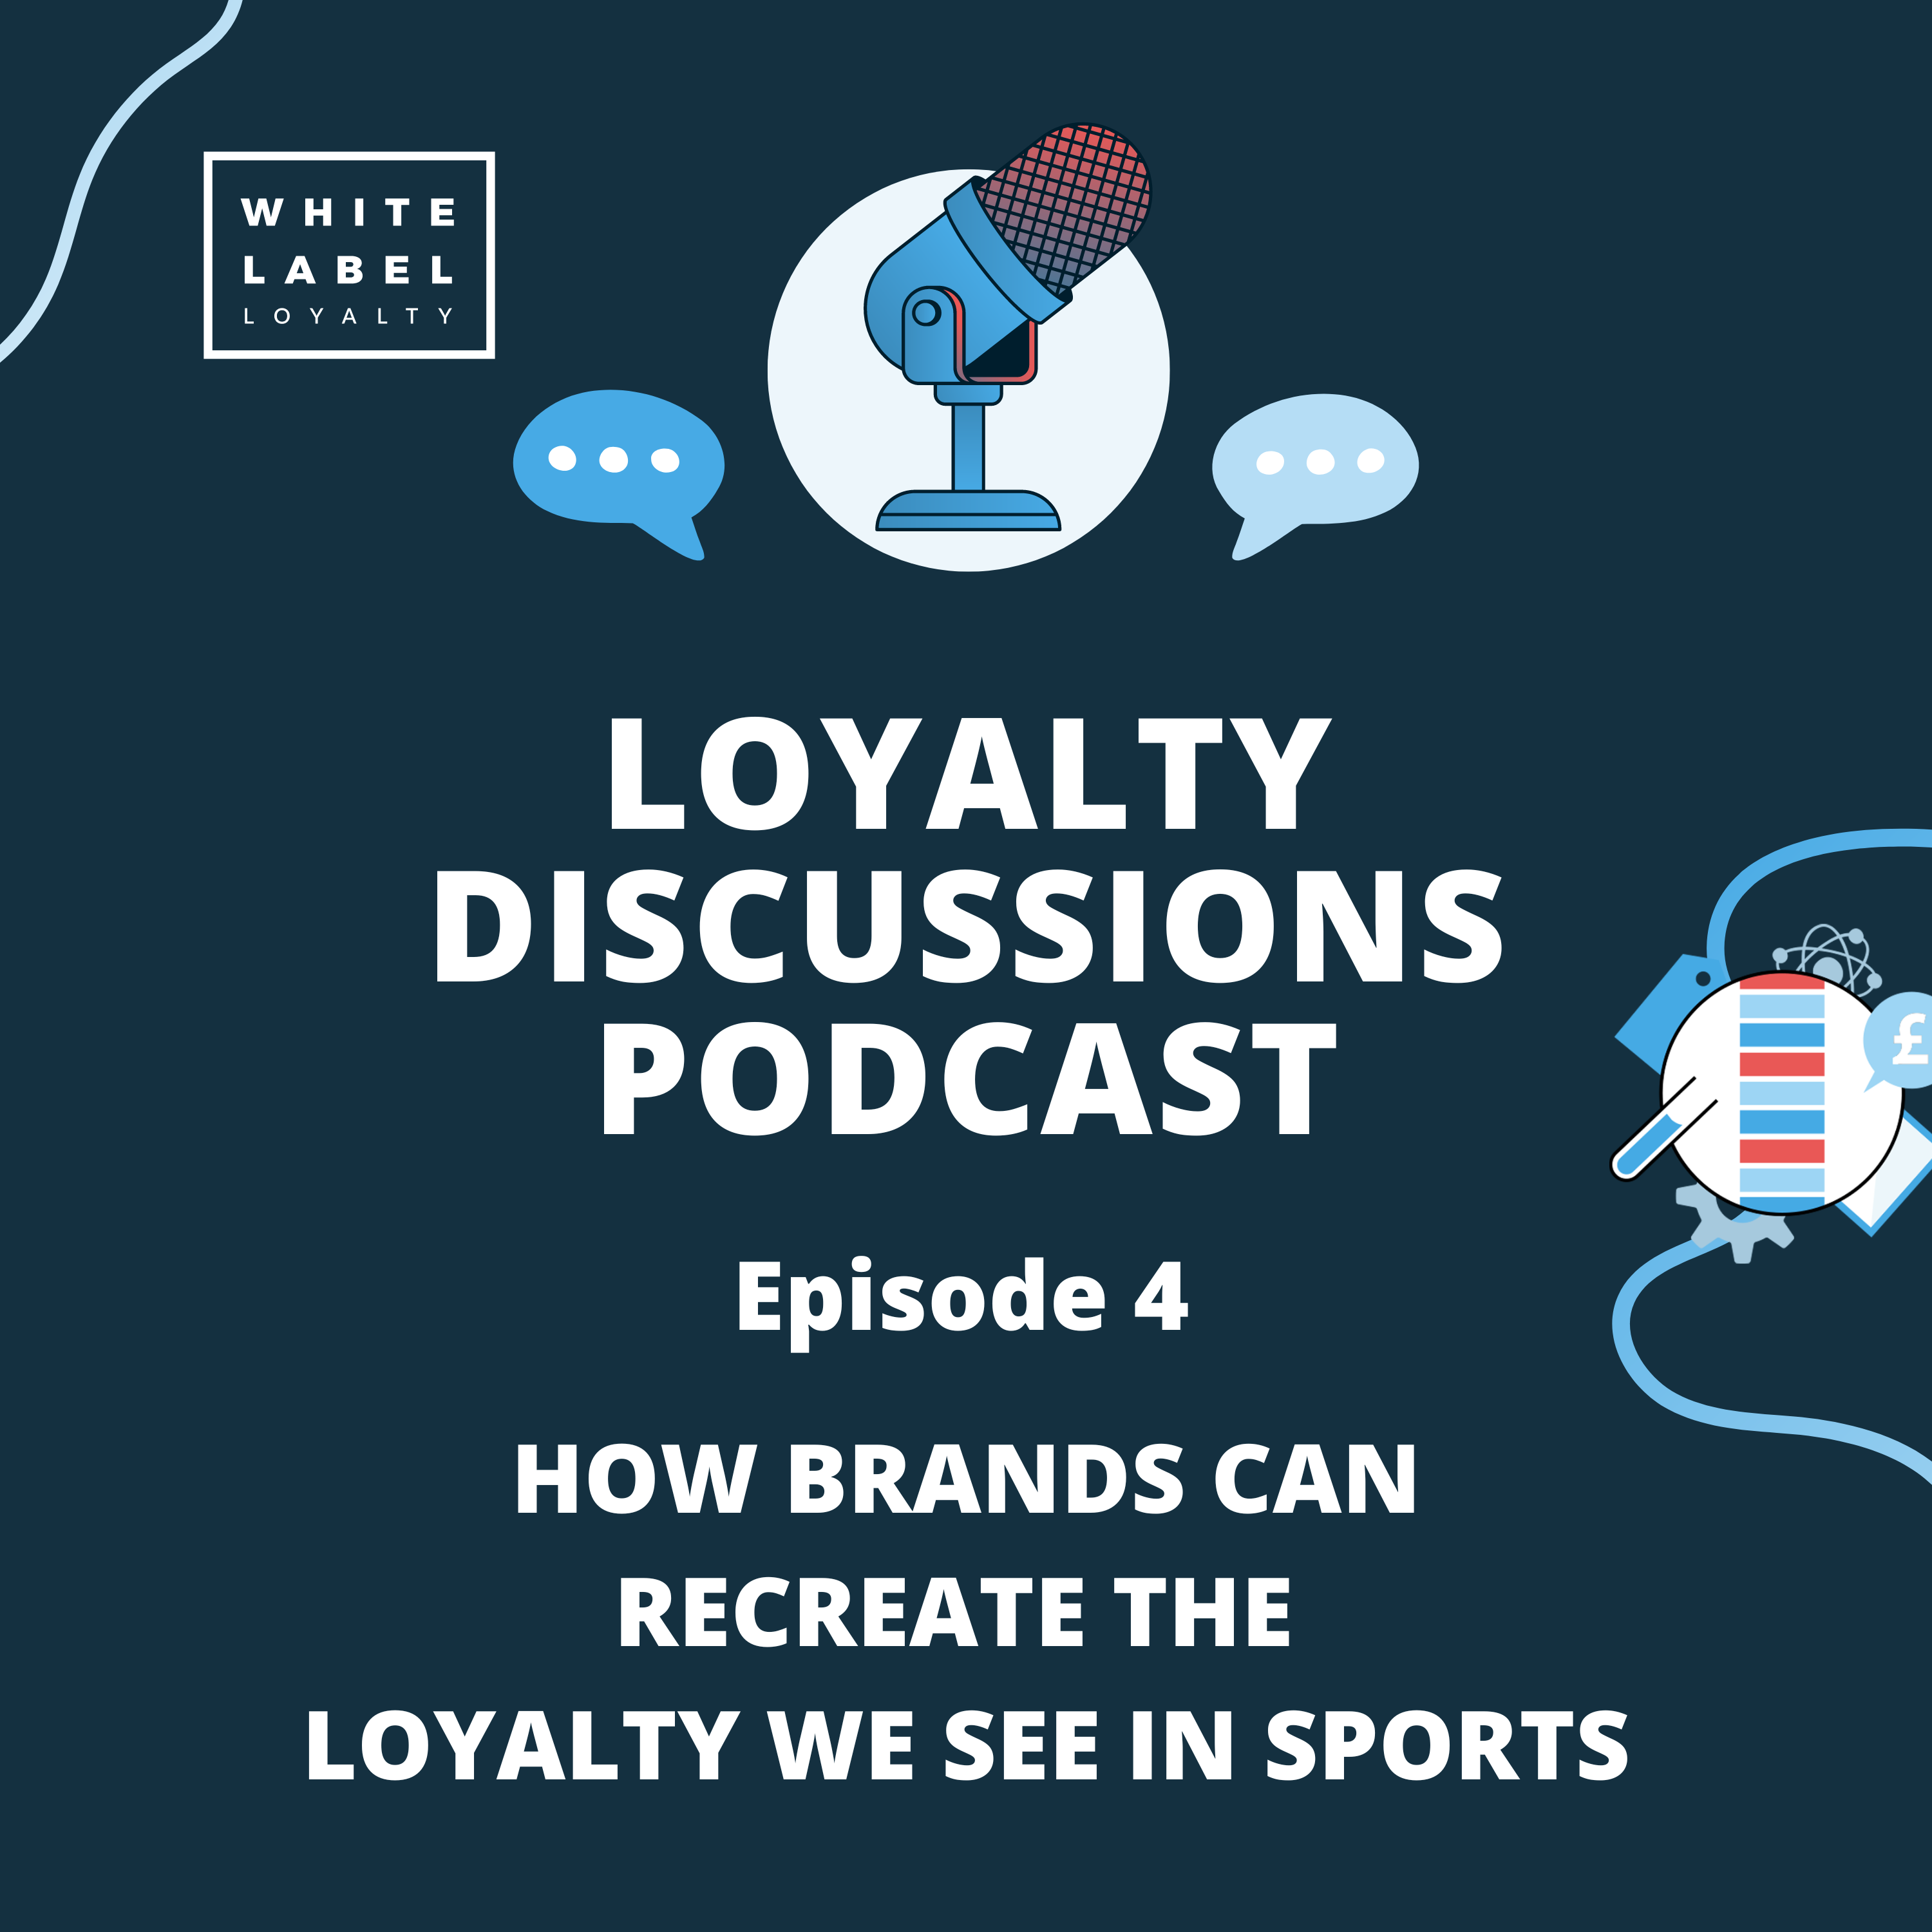 How brands can recreate the emotional loyalty we see in sports